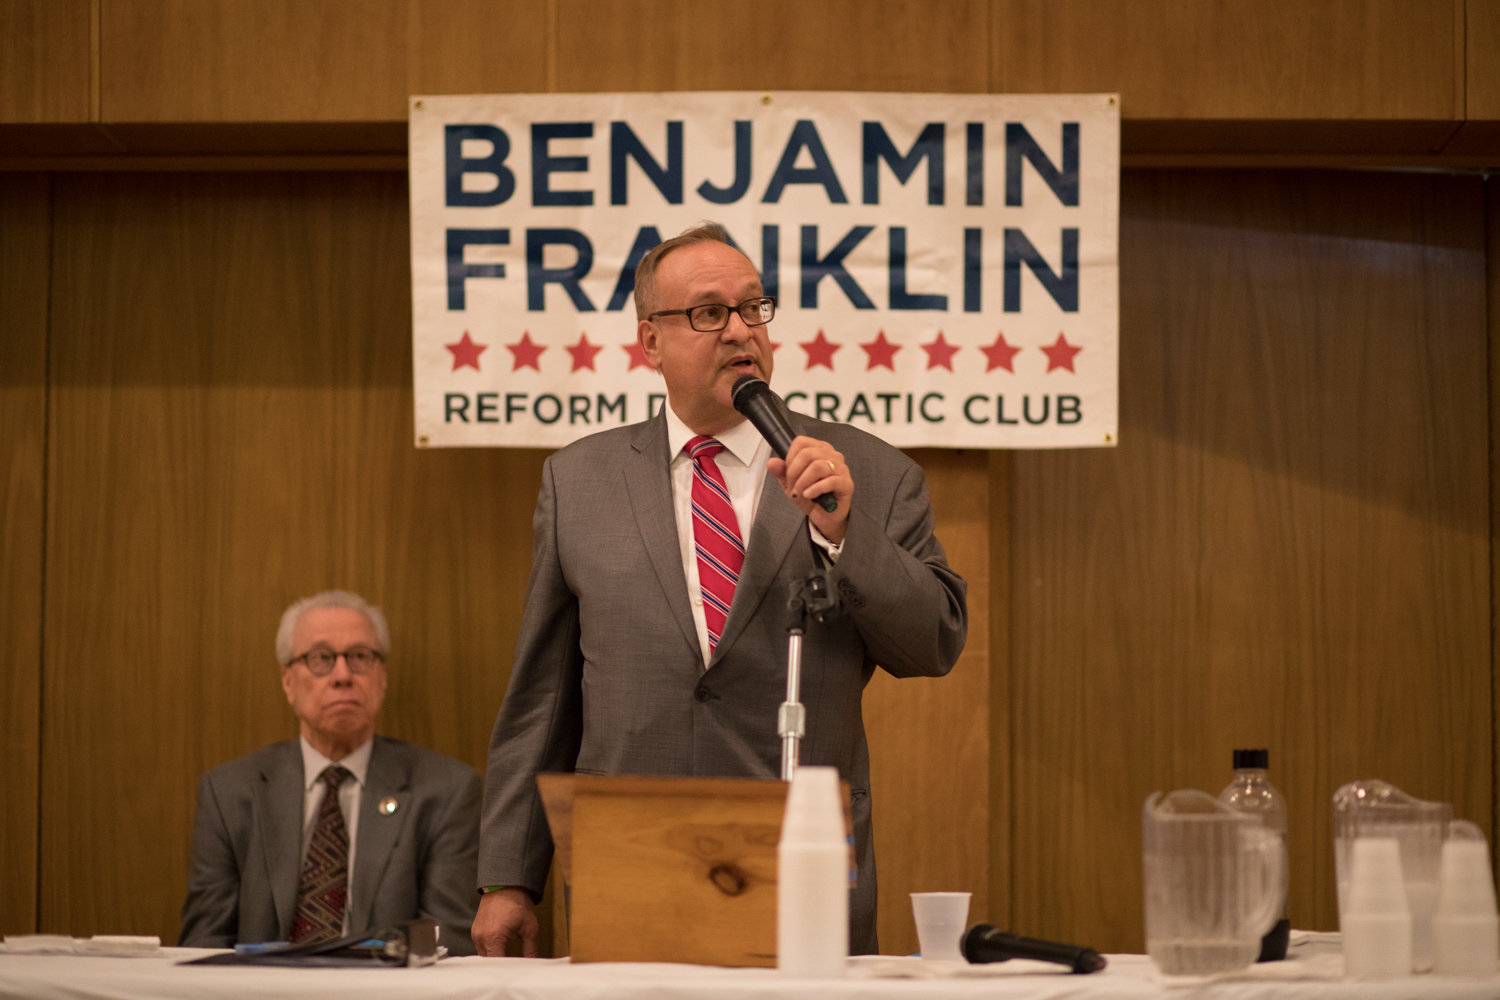 Benjamin Franklin Reform Democratic Club president Michael Heller looks to hold onto his seat in the club’s upcoming leadership election, but he’s facing insurrection from newer members who have put forth an alternative slate of candidates led by educator Morgan Evers.